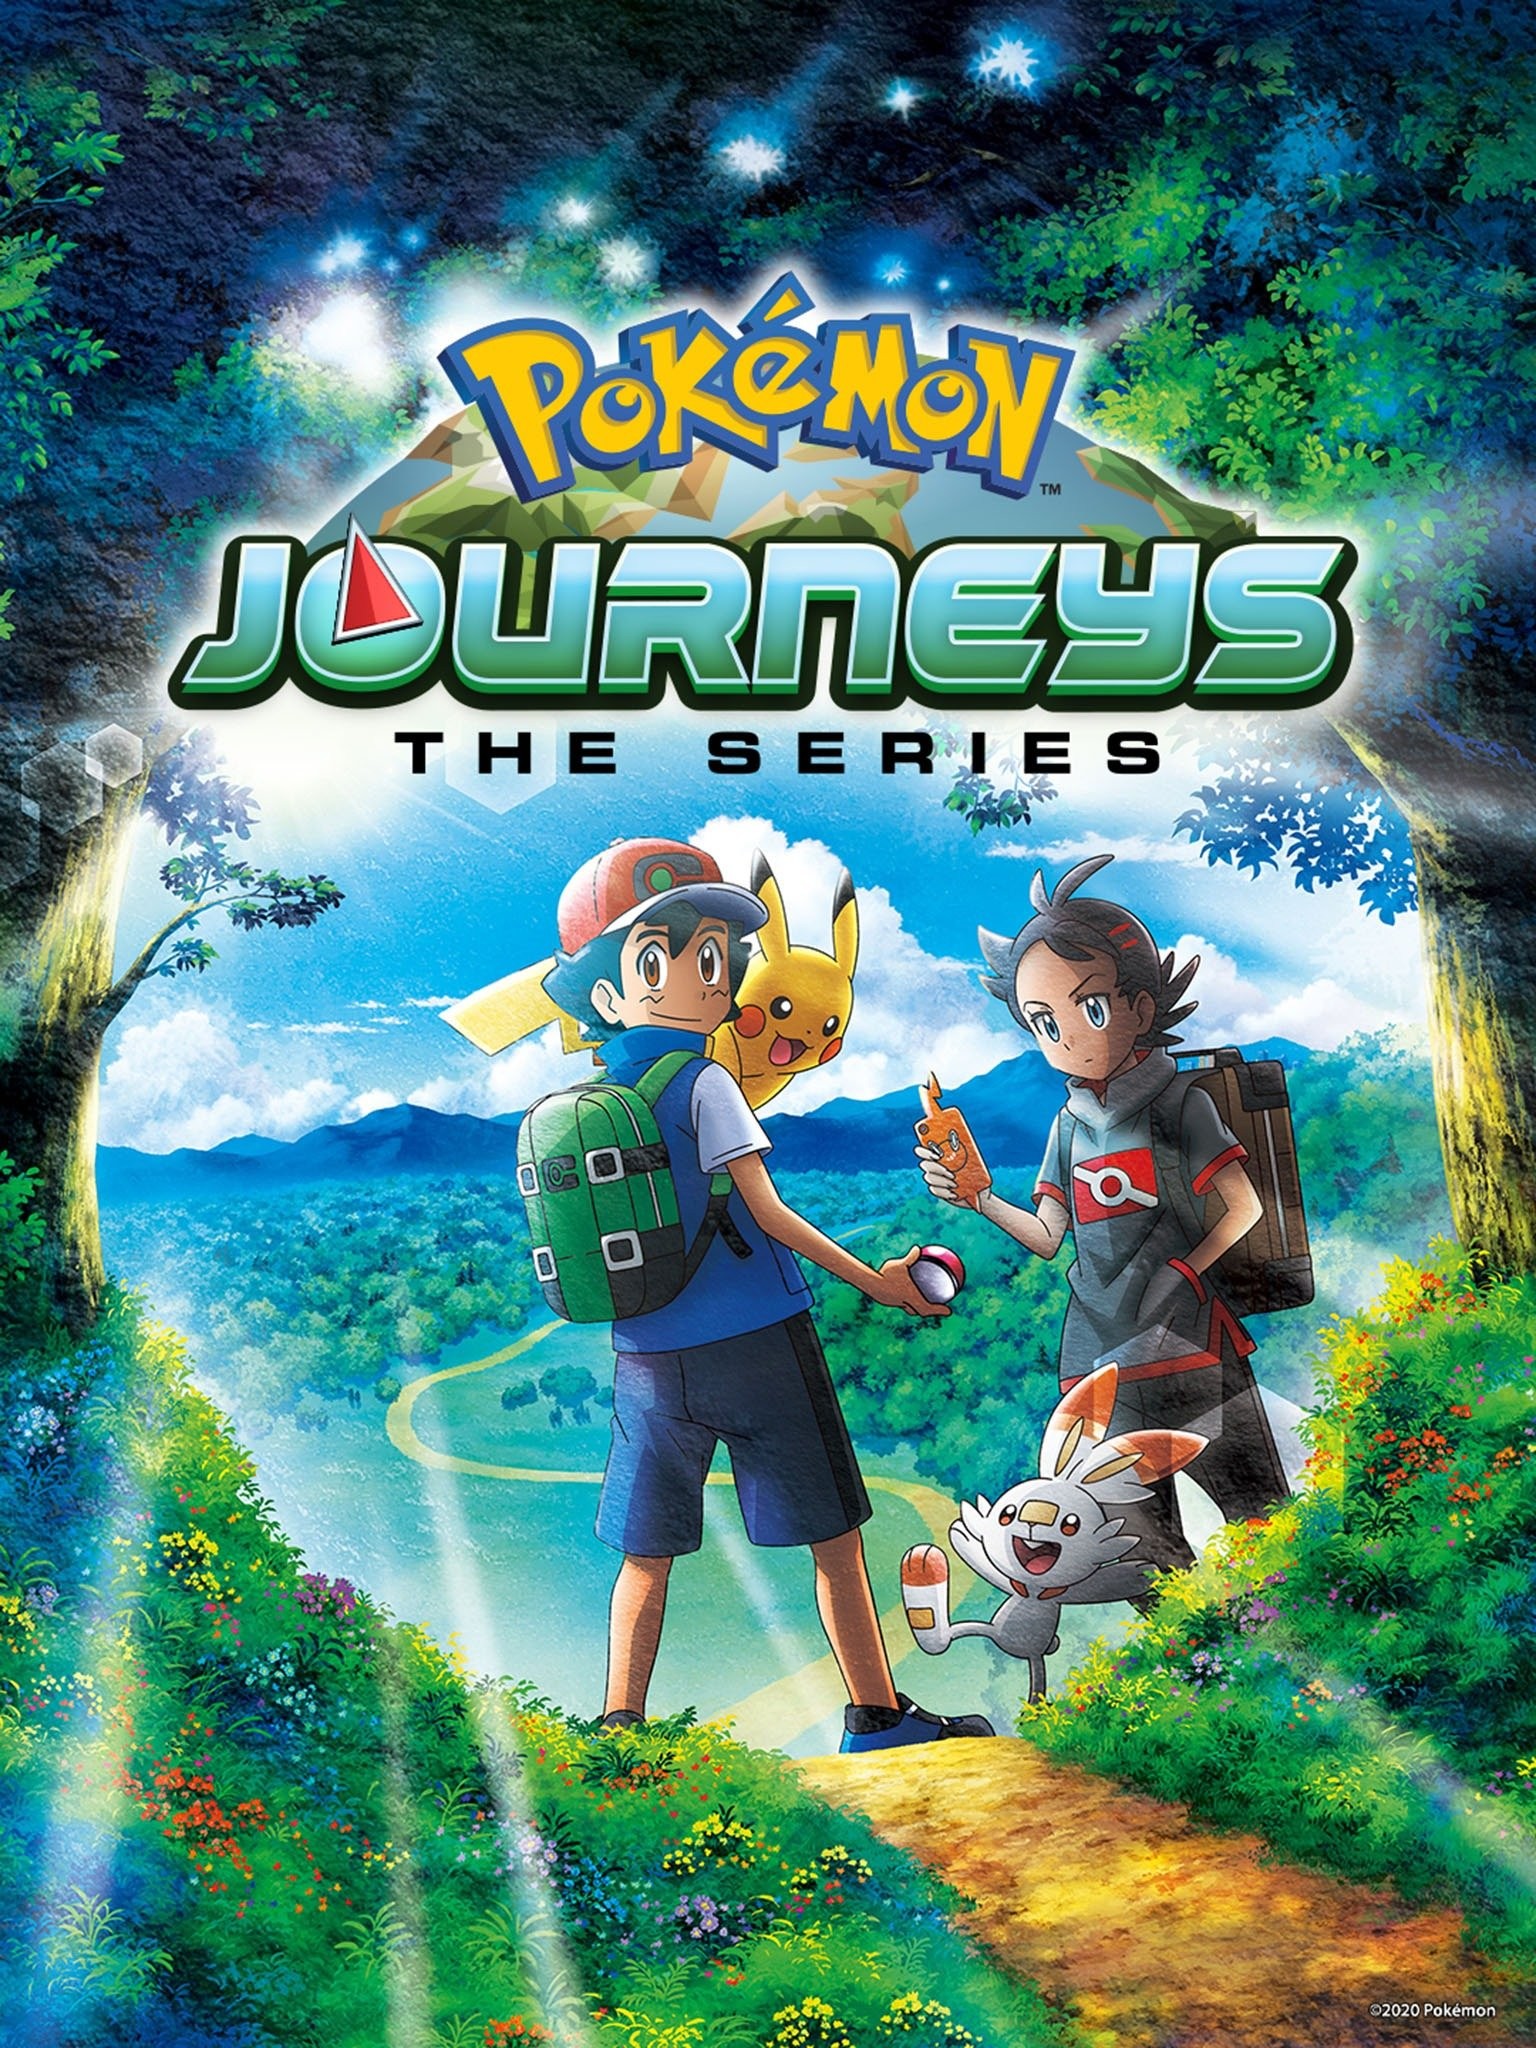 When Pokemon Journeys started all the way back in 2019, I went